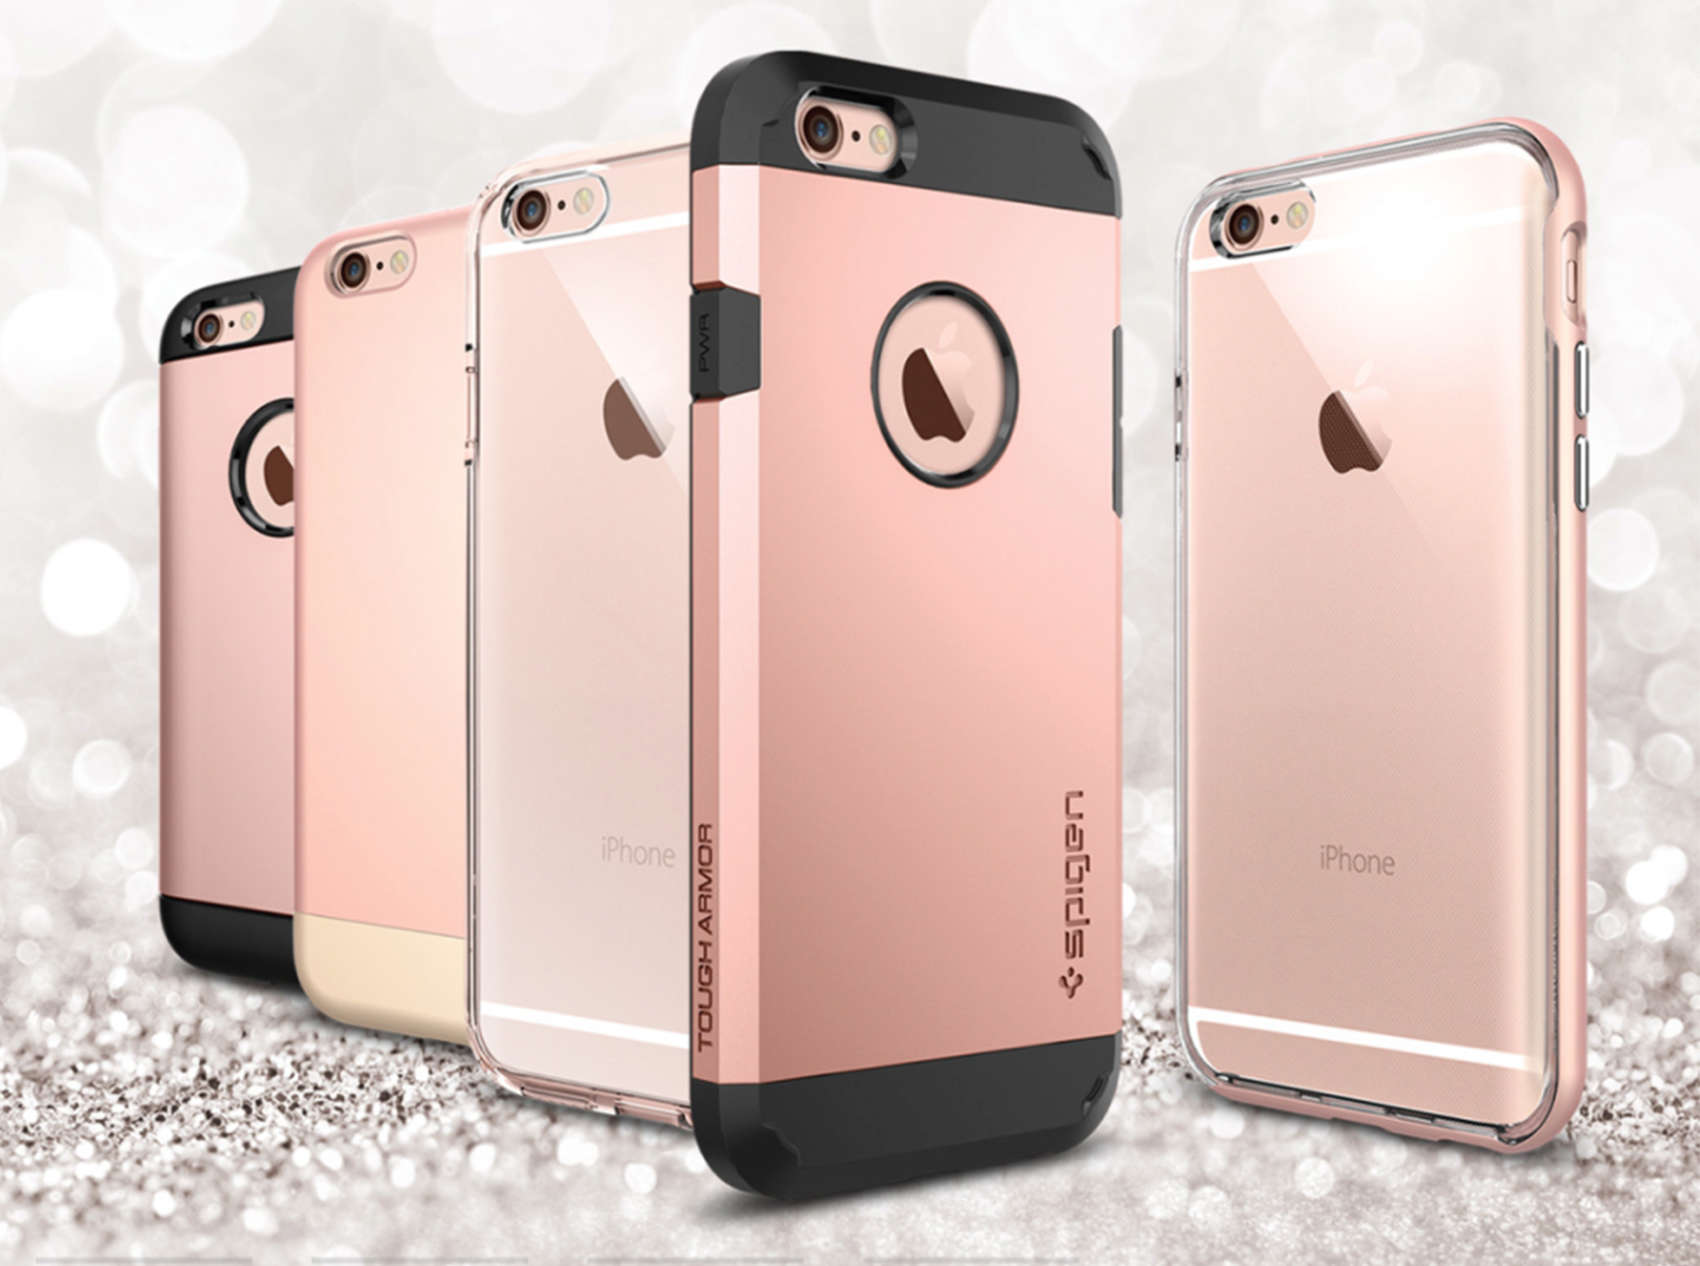 Things are looking rosy for accessory manufacturers, like Spigen, ready to provide cases for the iPhone 6s.